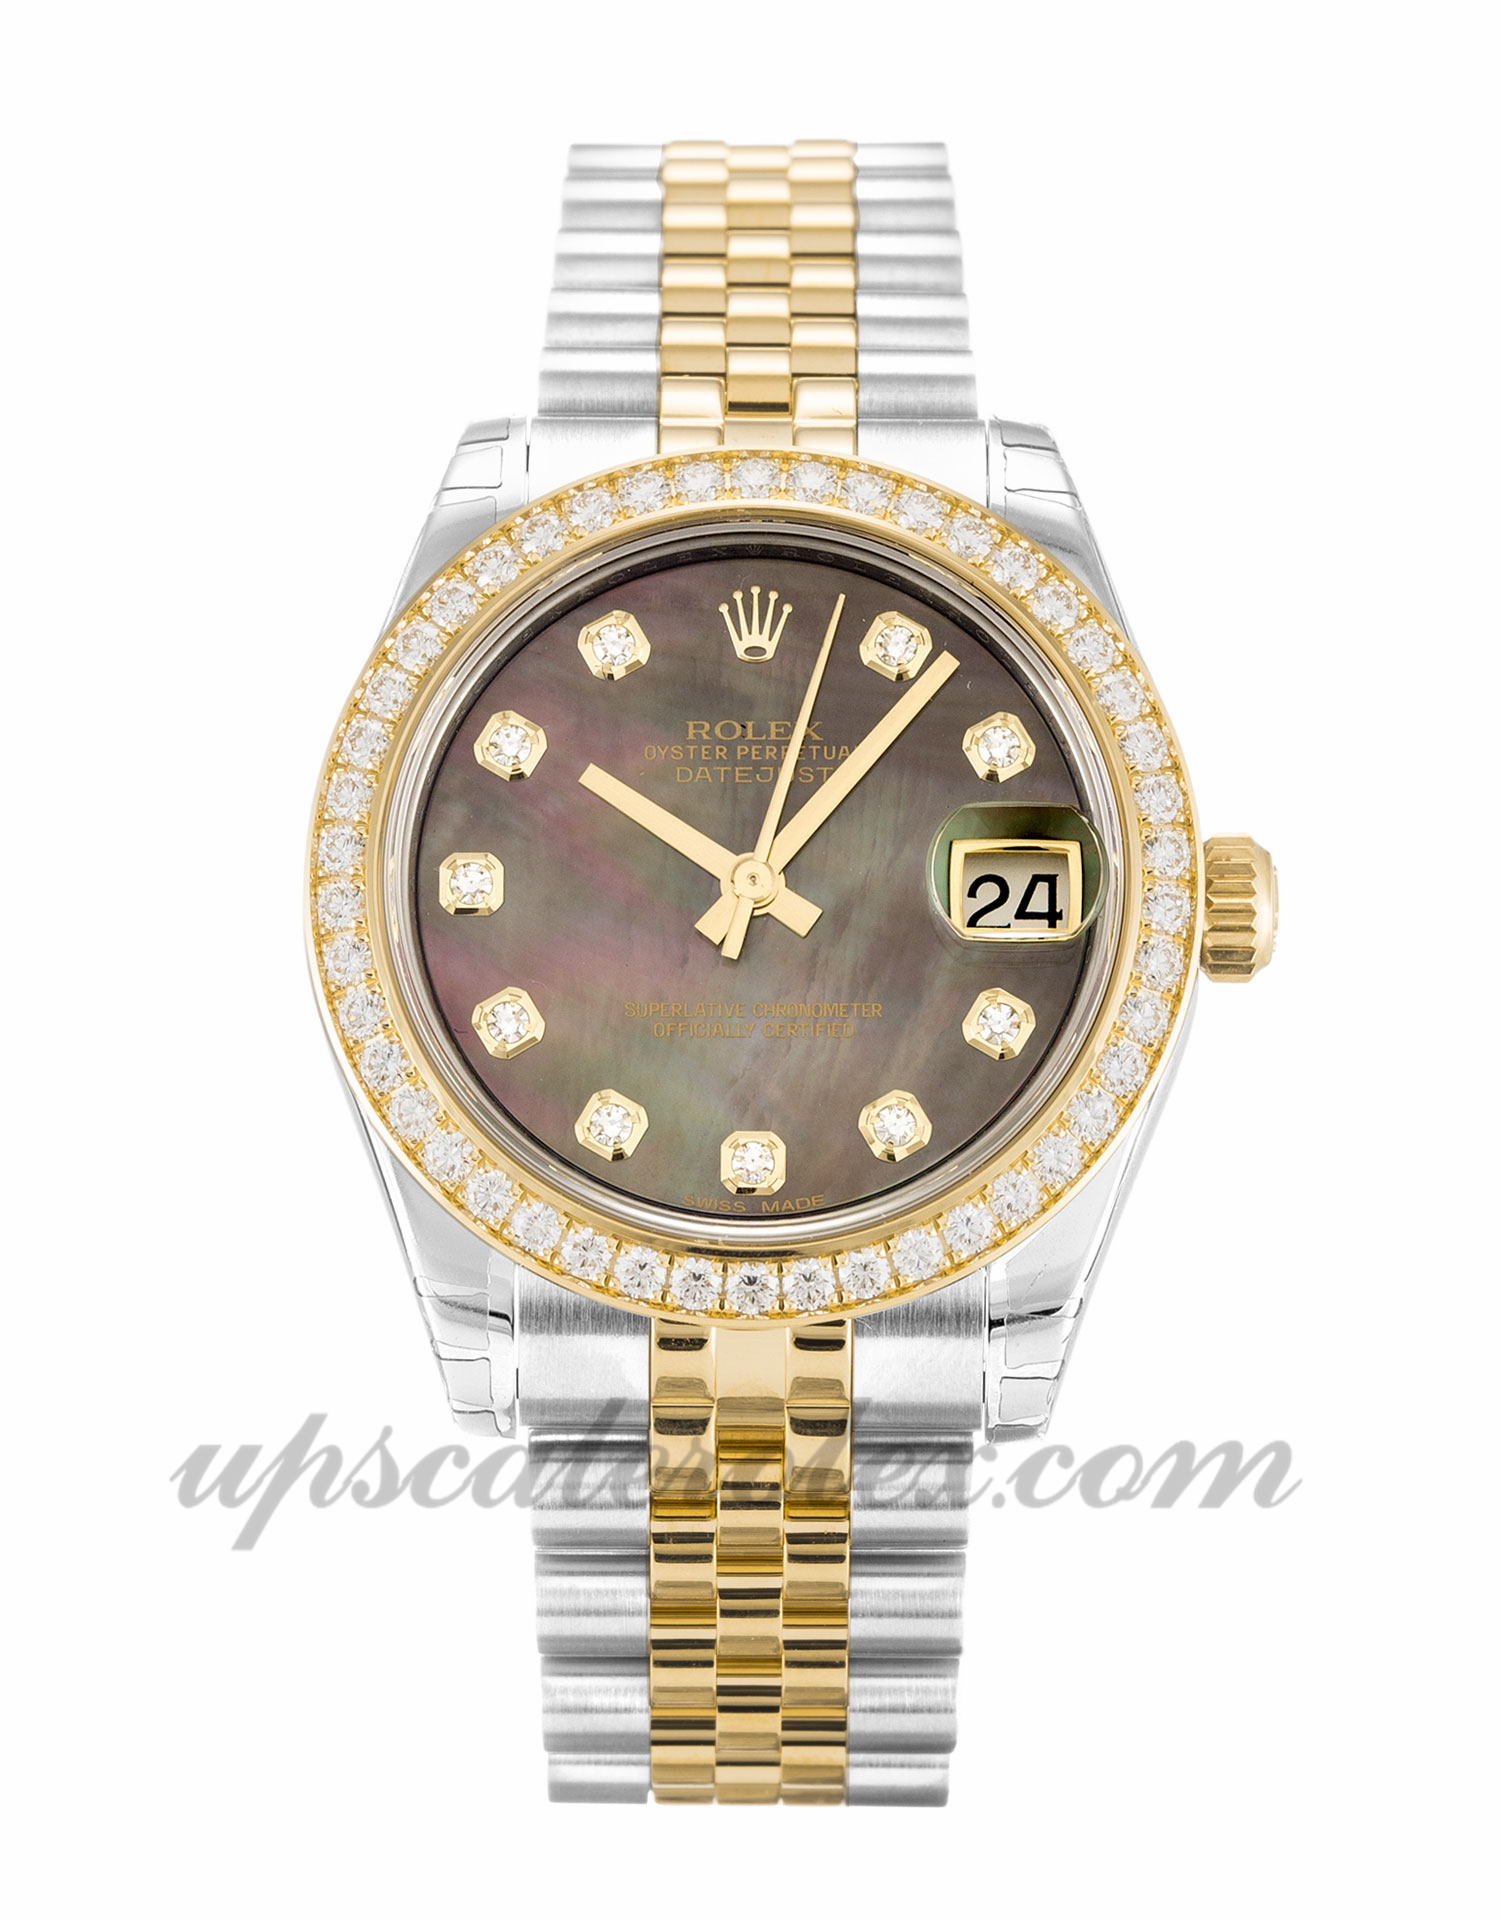 rolex look alike watches for sale